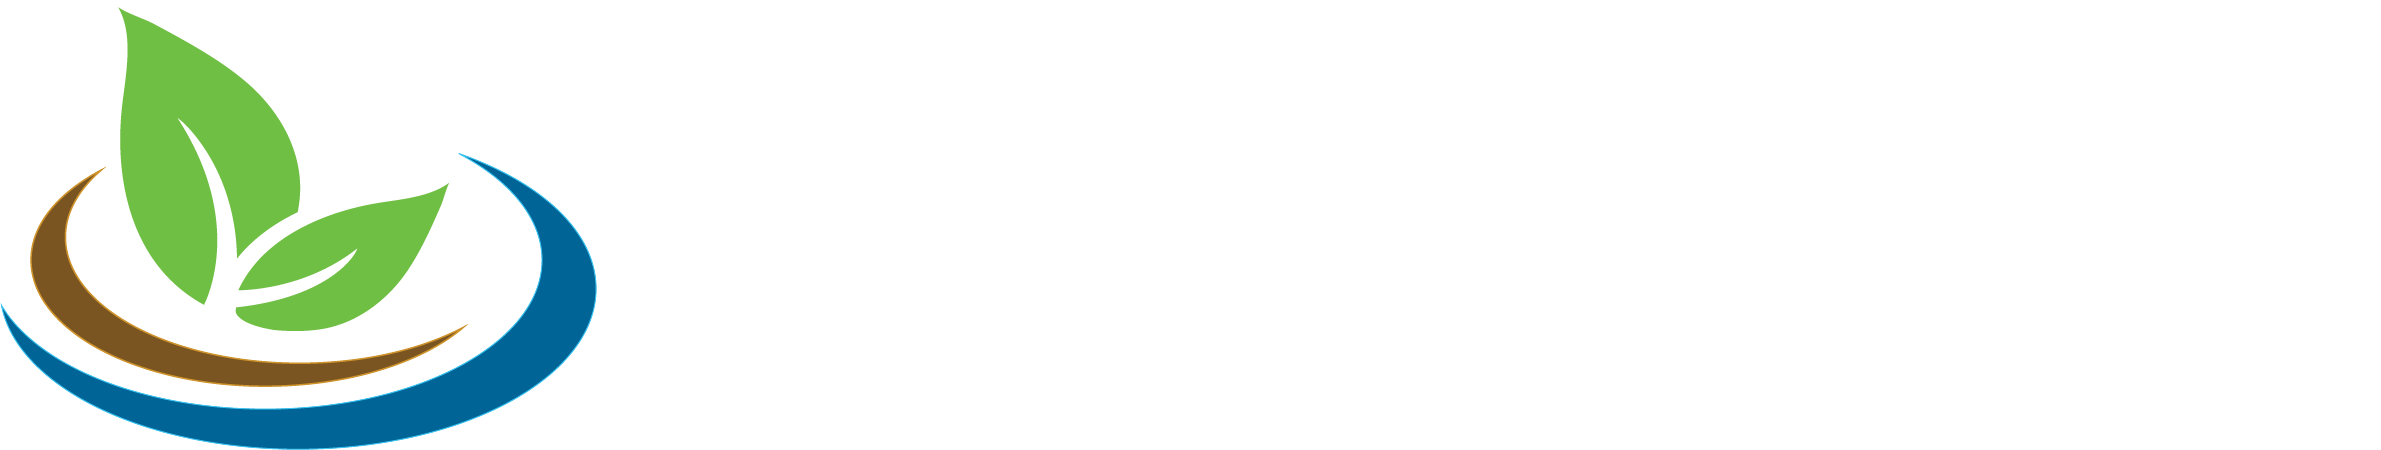 McMullin Area Groundwater Sustainability Agency